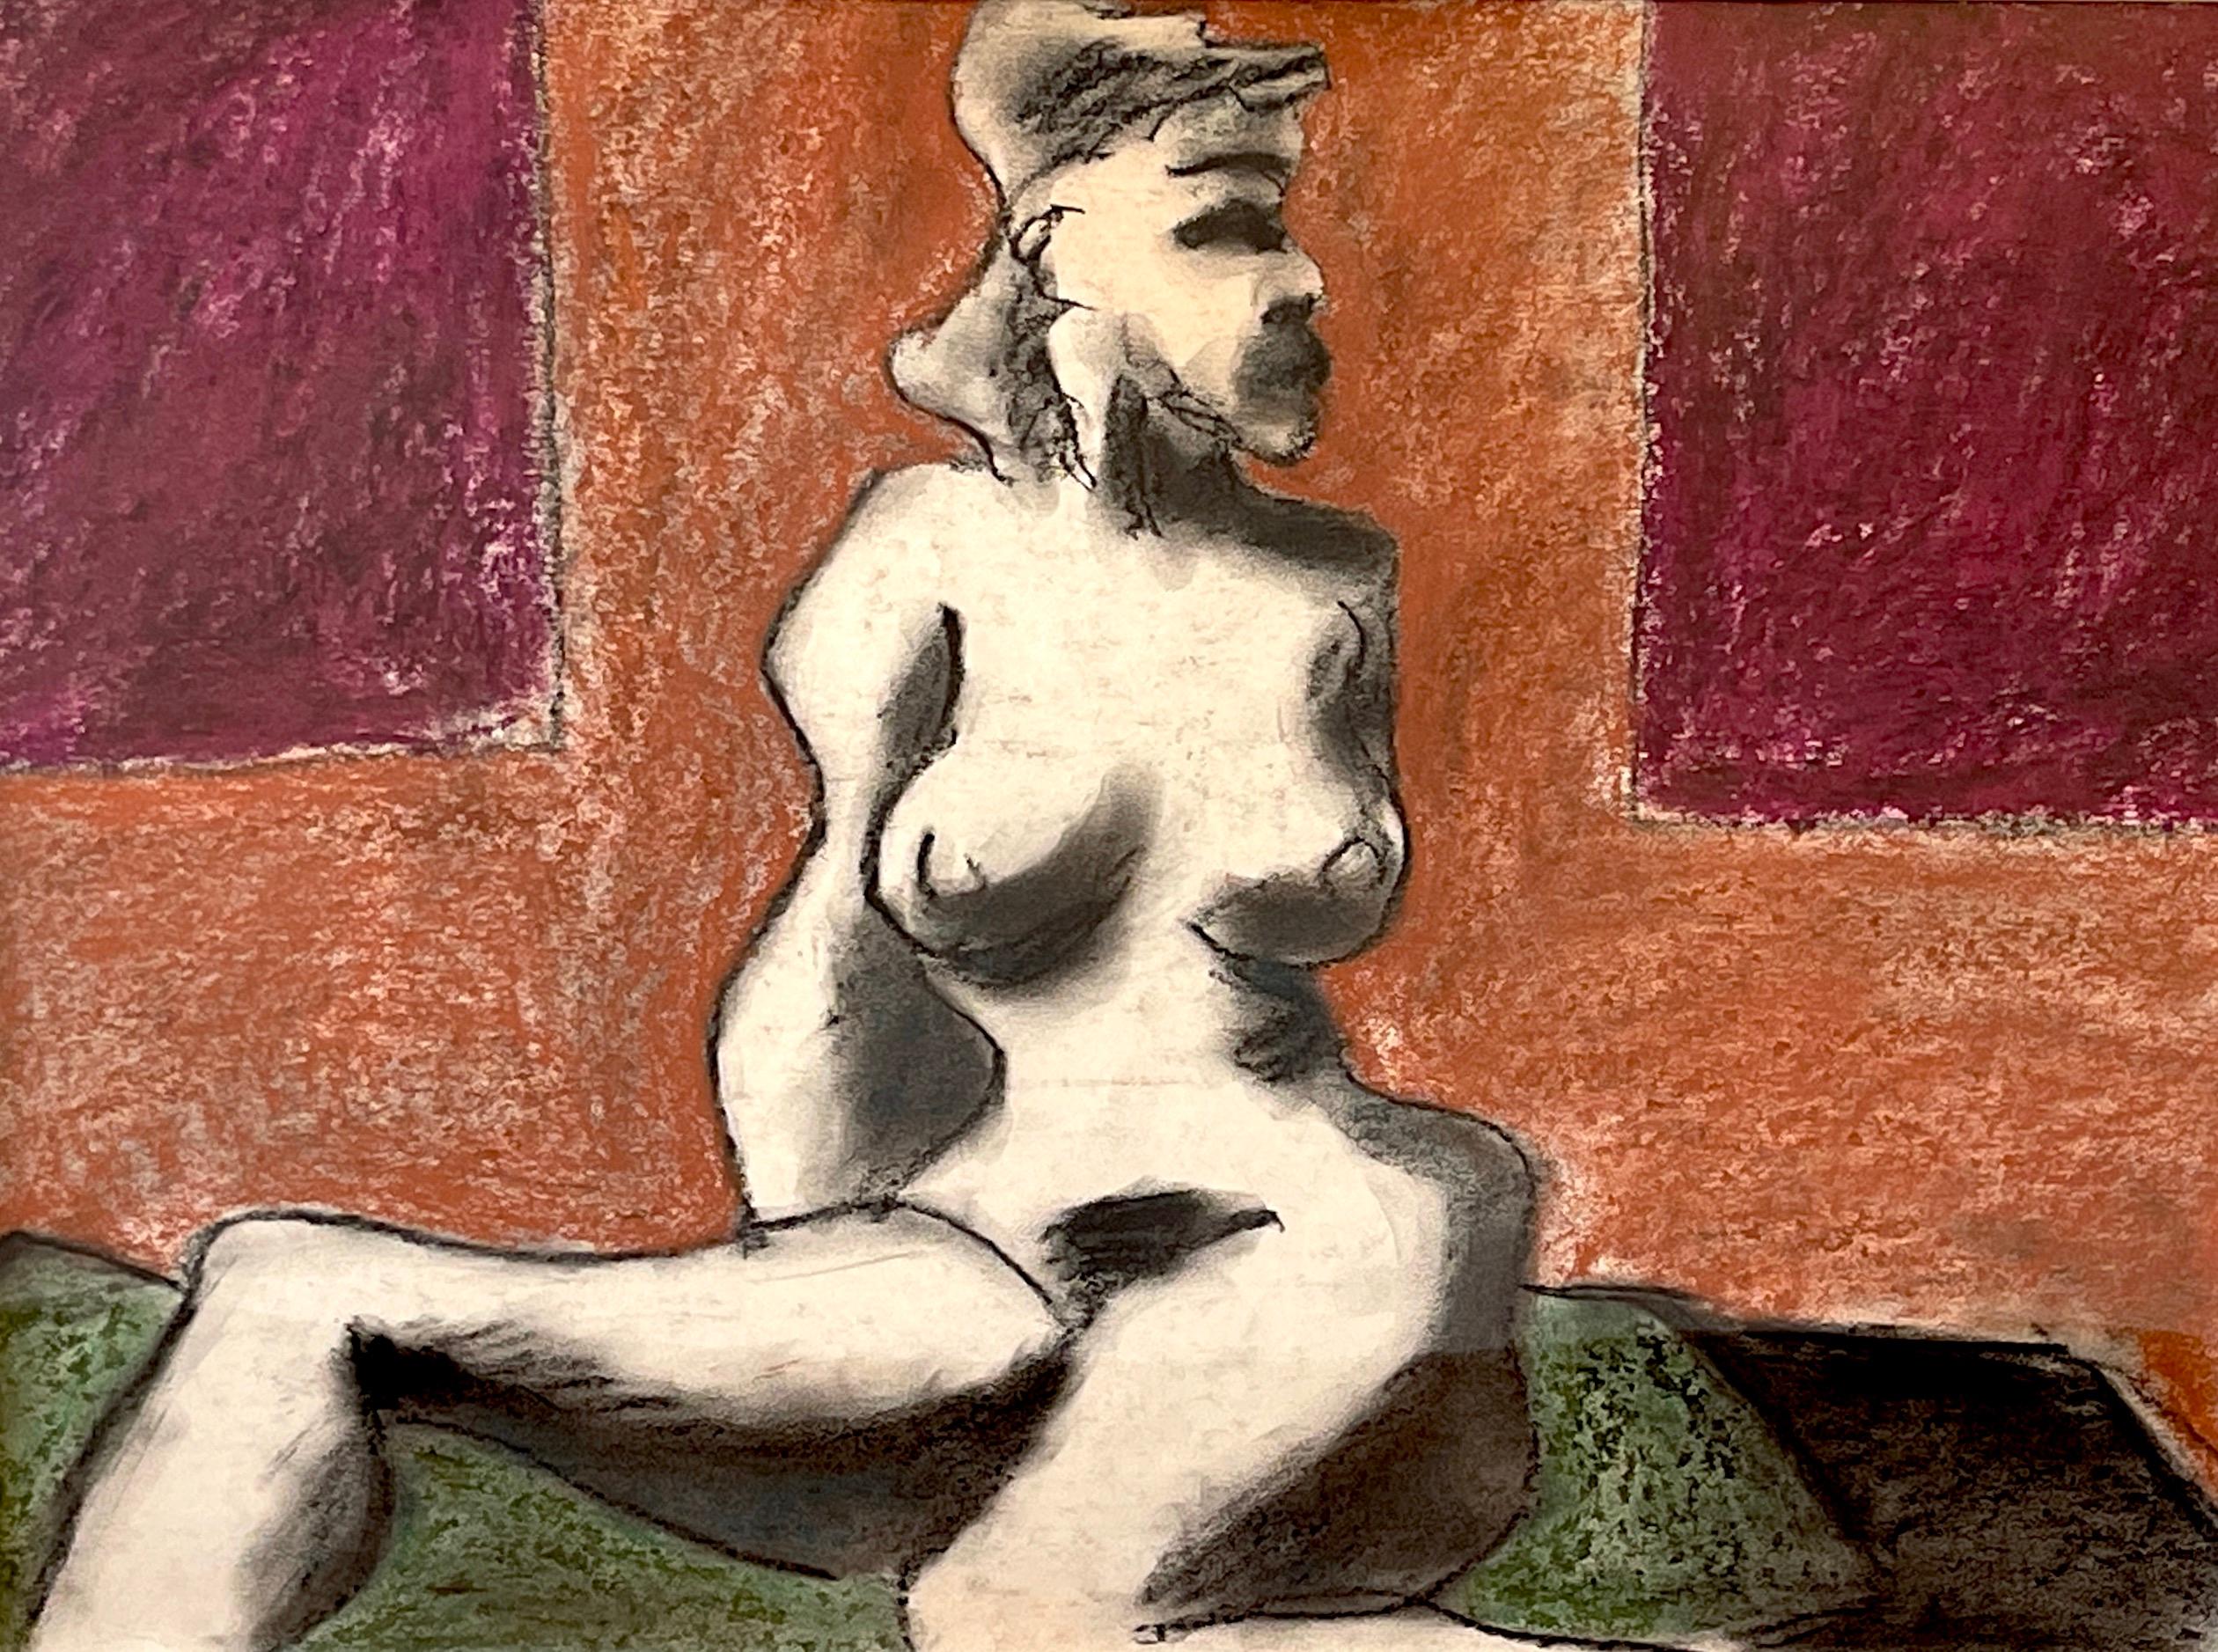 American 'Seated Female Nude' Oil/Mixed Media on Paper, 1960s by Douglas D. Peden For Sale